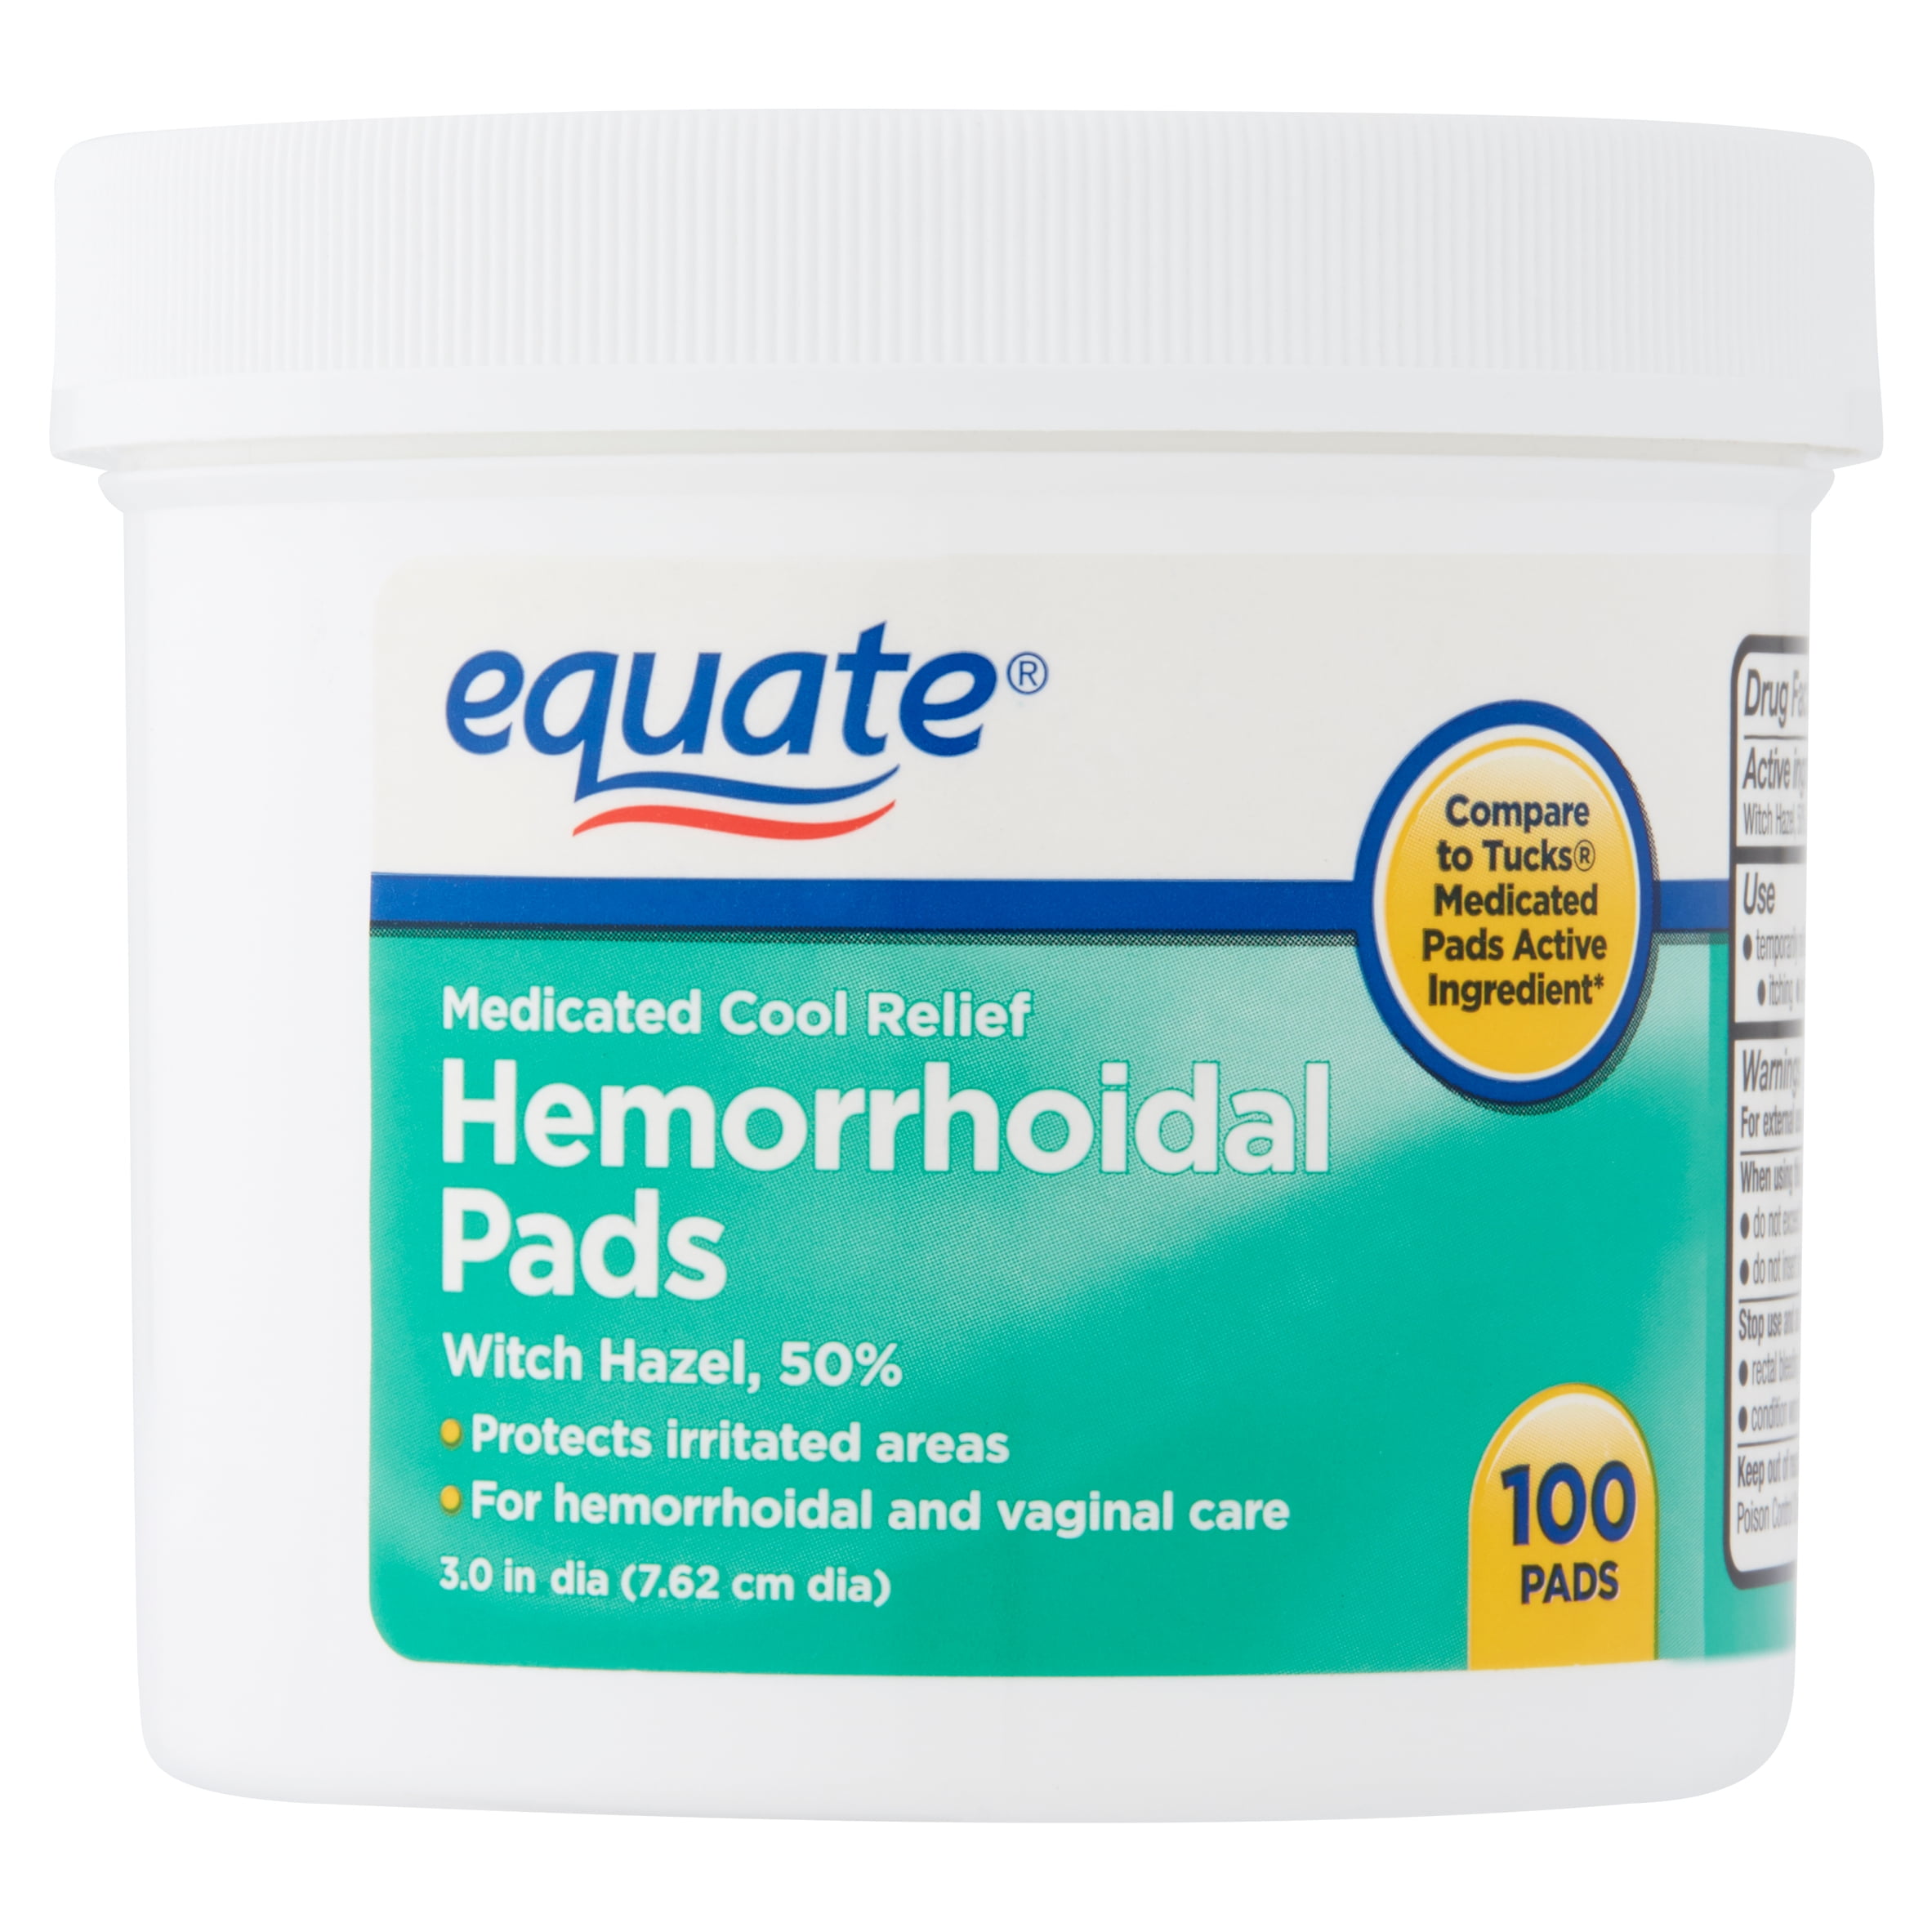 Equate Medicated Cool Relief Hemorrhoidal Pads, 100 Count